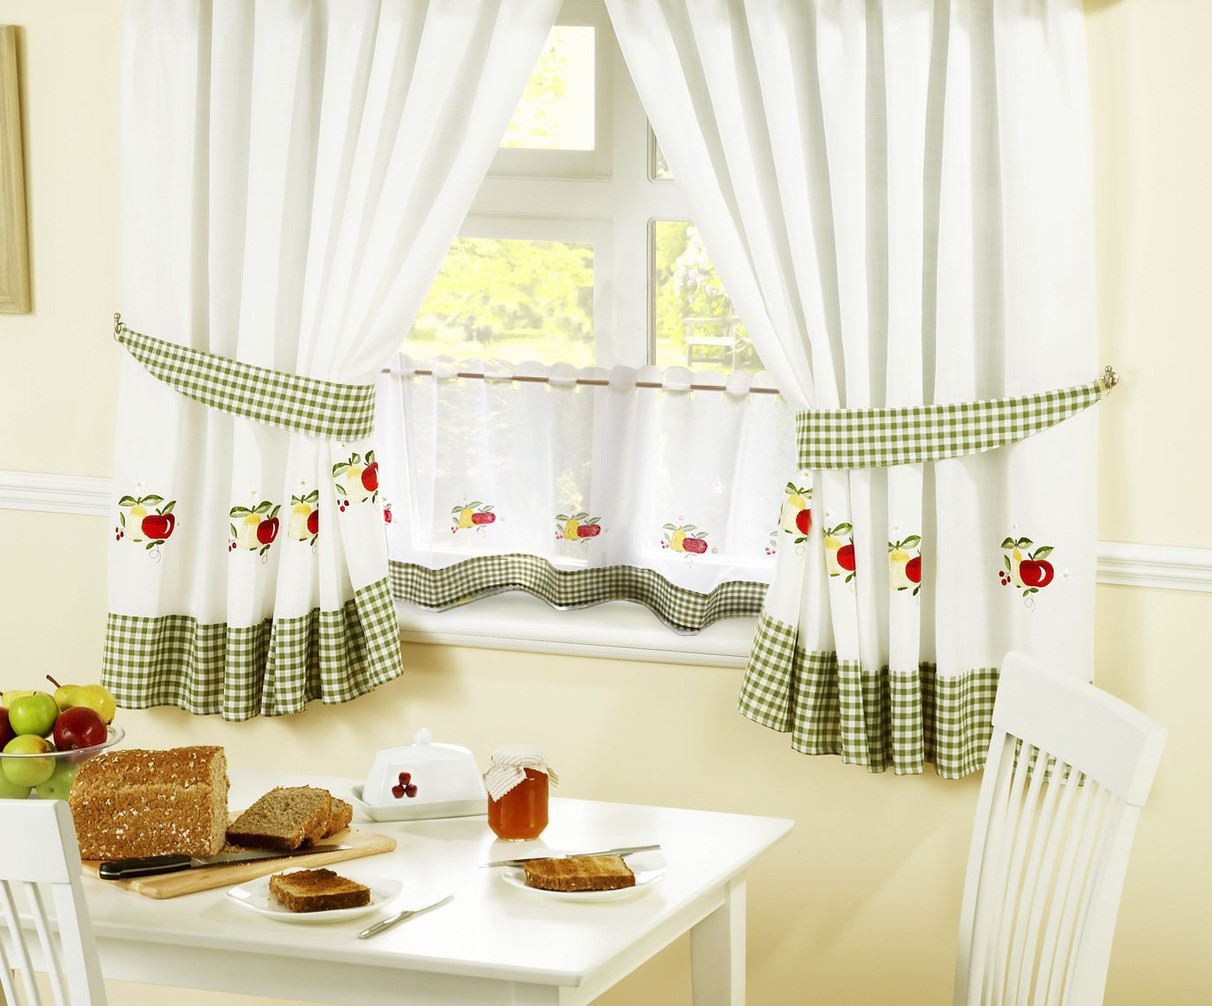 Gingham Kitchen Curtains
 APPLES & PEARS GINGHAM KITCHEN CURTAINS & 24” CAFE PANEL